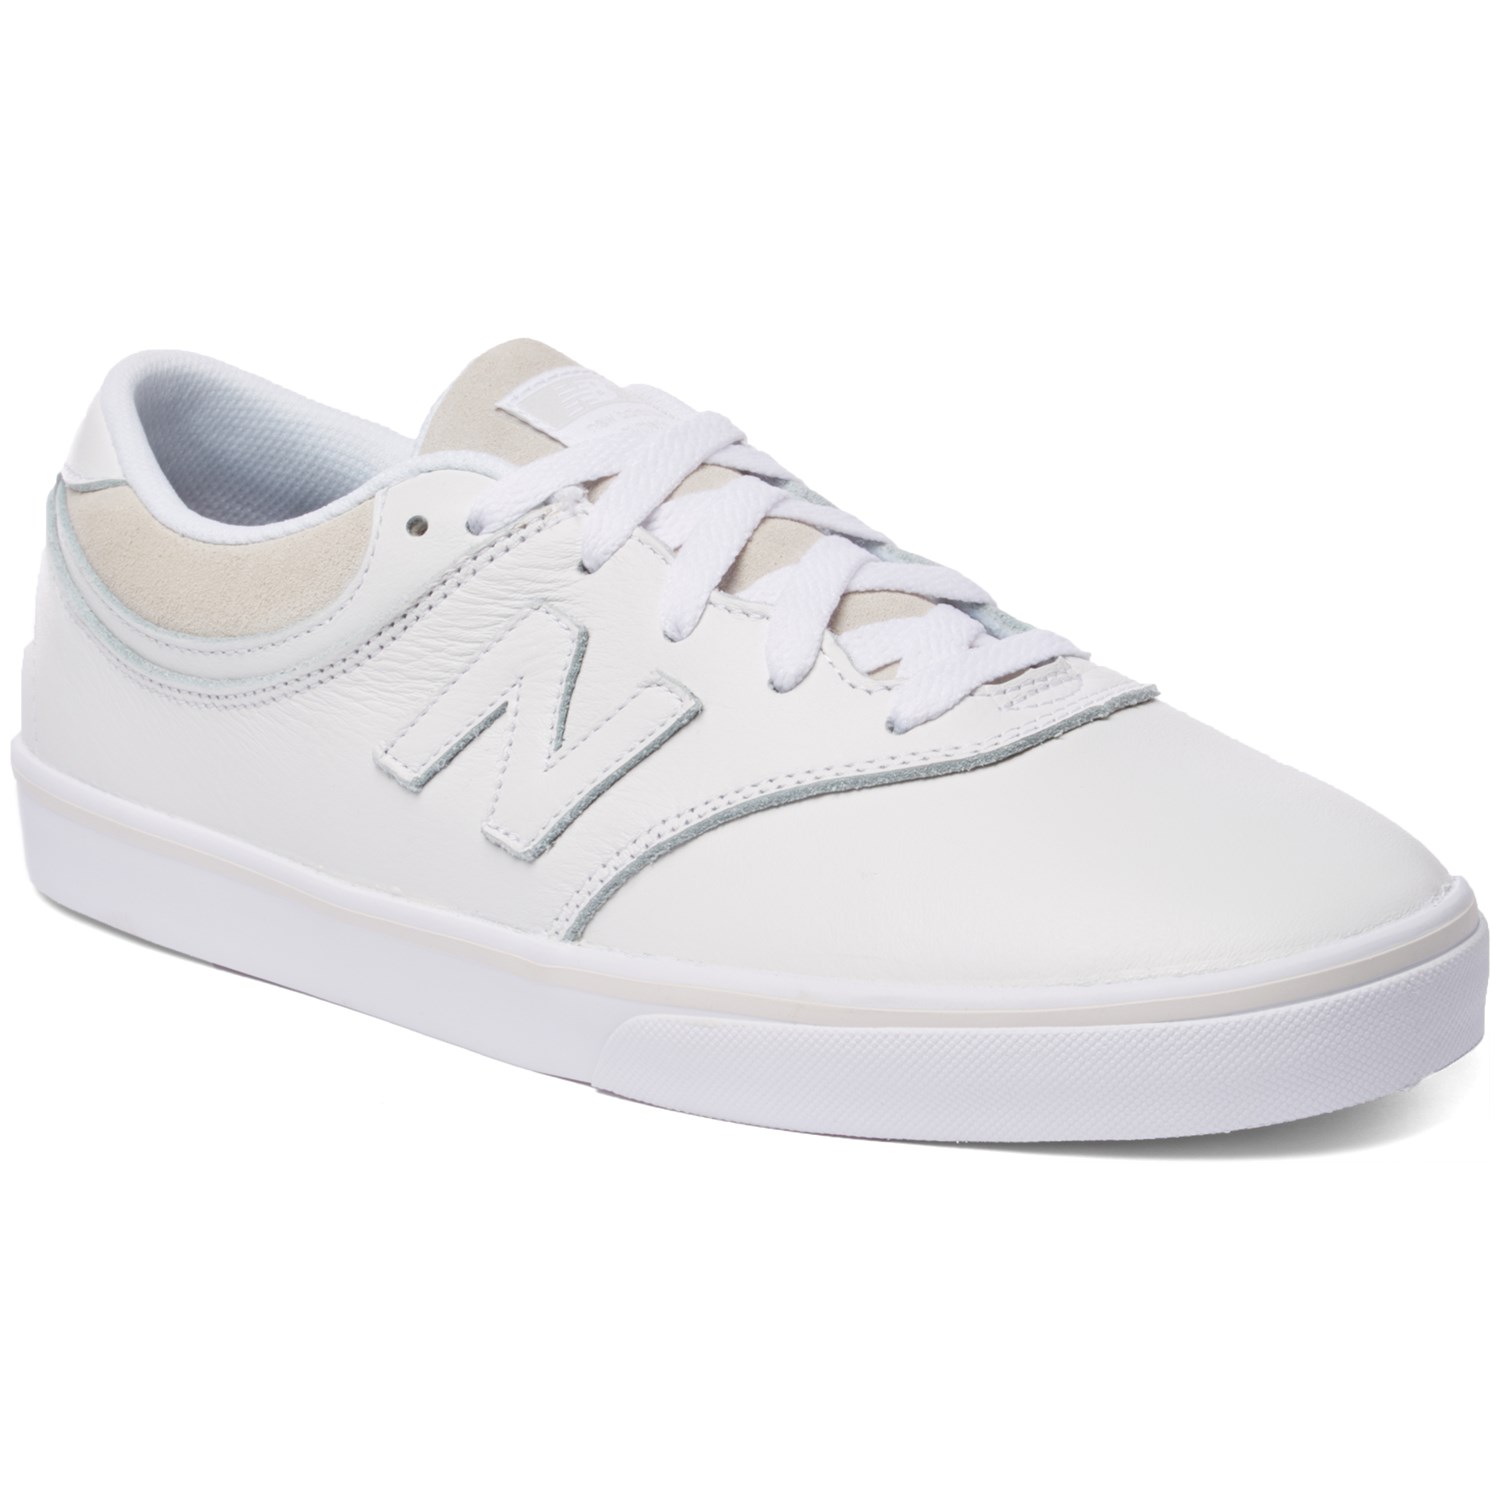 New Balance Numeric Quincy 254 Genuine Leather Shoes | evo اريام